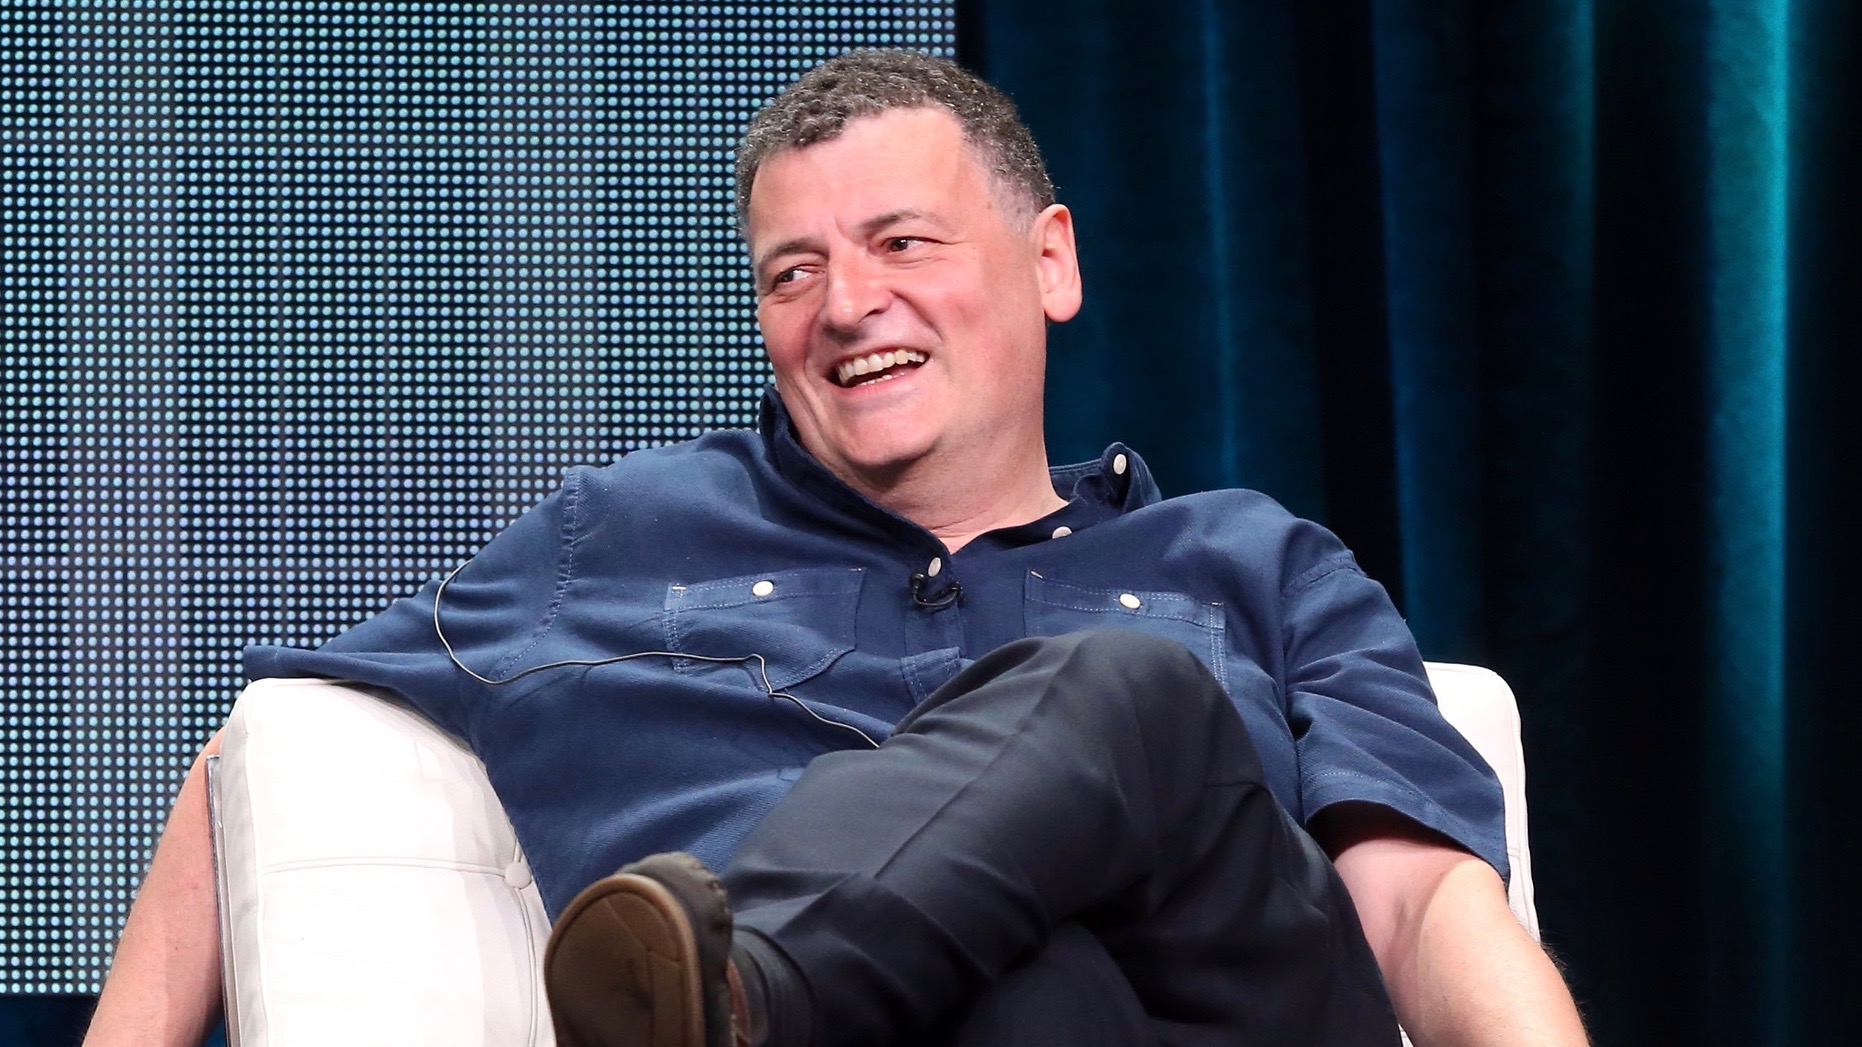 speaks onstage during the 'Doctor Who' panel discussion at the BBC America portion of the 2015 Summer TCA Tour at The Beverly Hilton Hotel on July 31, 2015 in Beverly Hills, California.